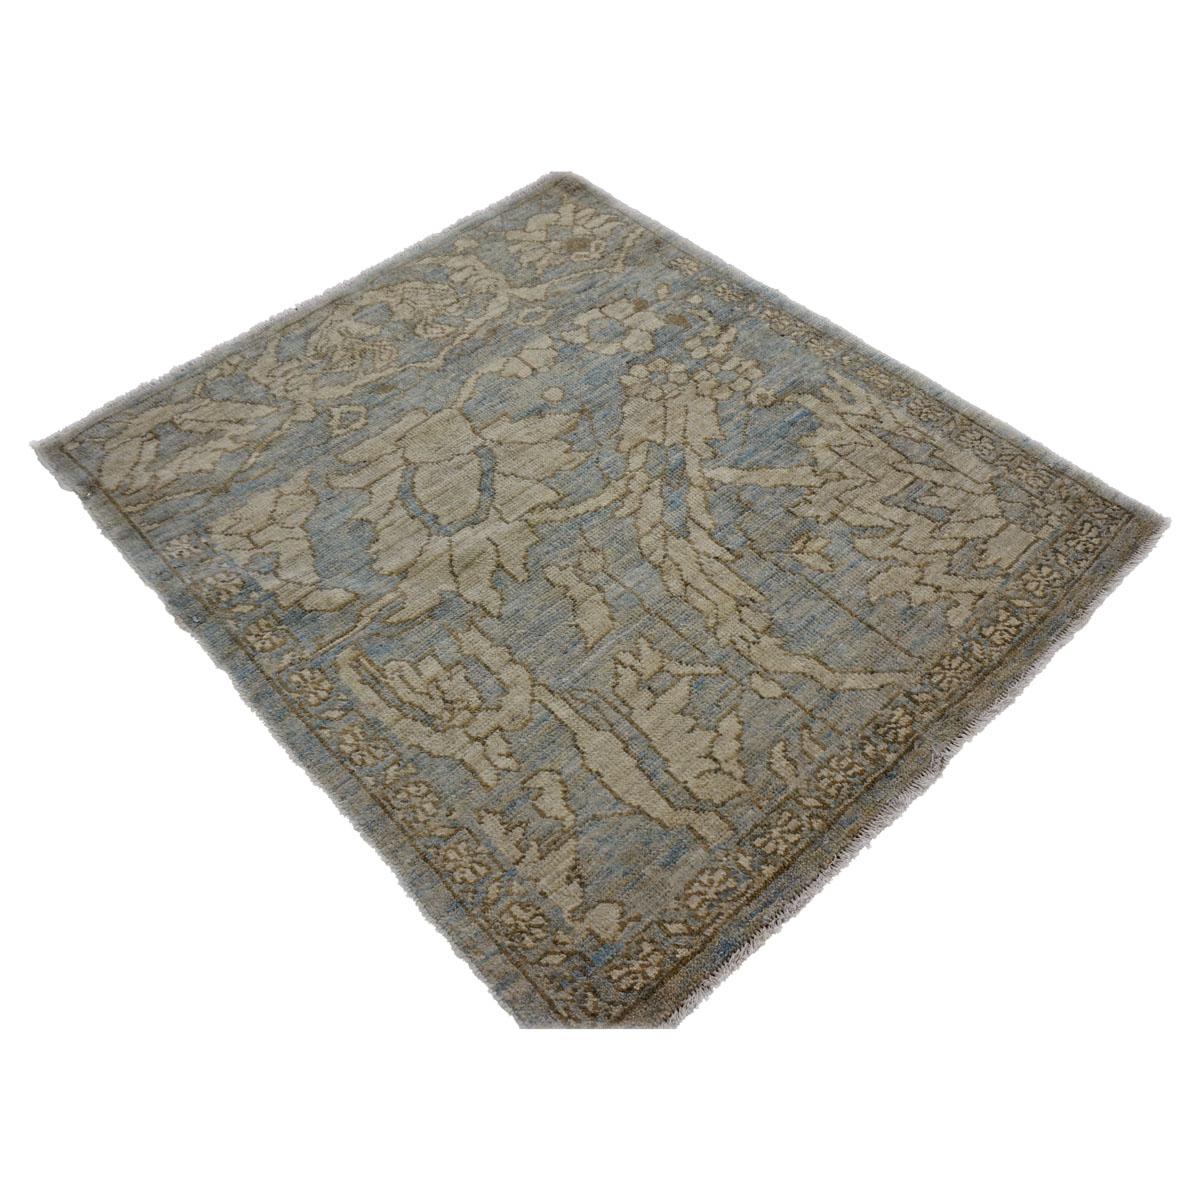 21st Century Persian Sultanabad Master 3x3 Slate Blue & Grey Handmade Area Rug In Excellent Condition For Sale In Houston, TX